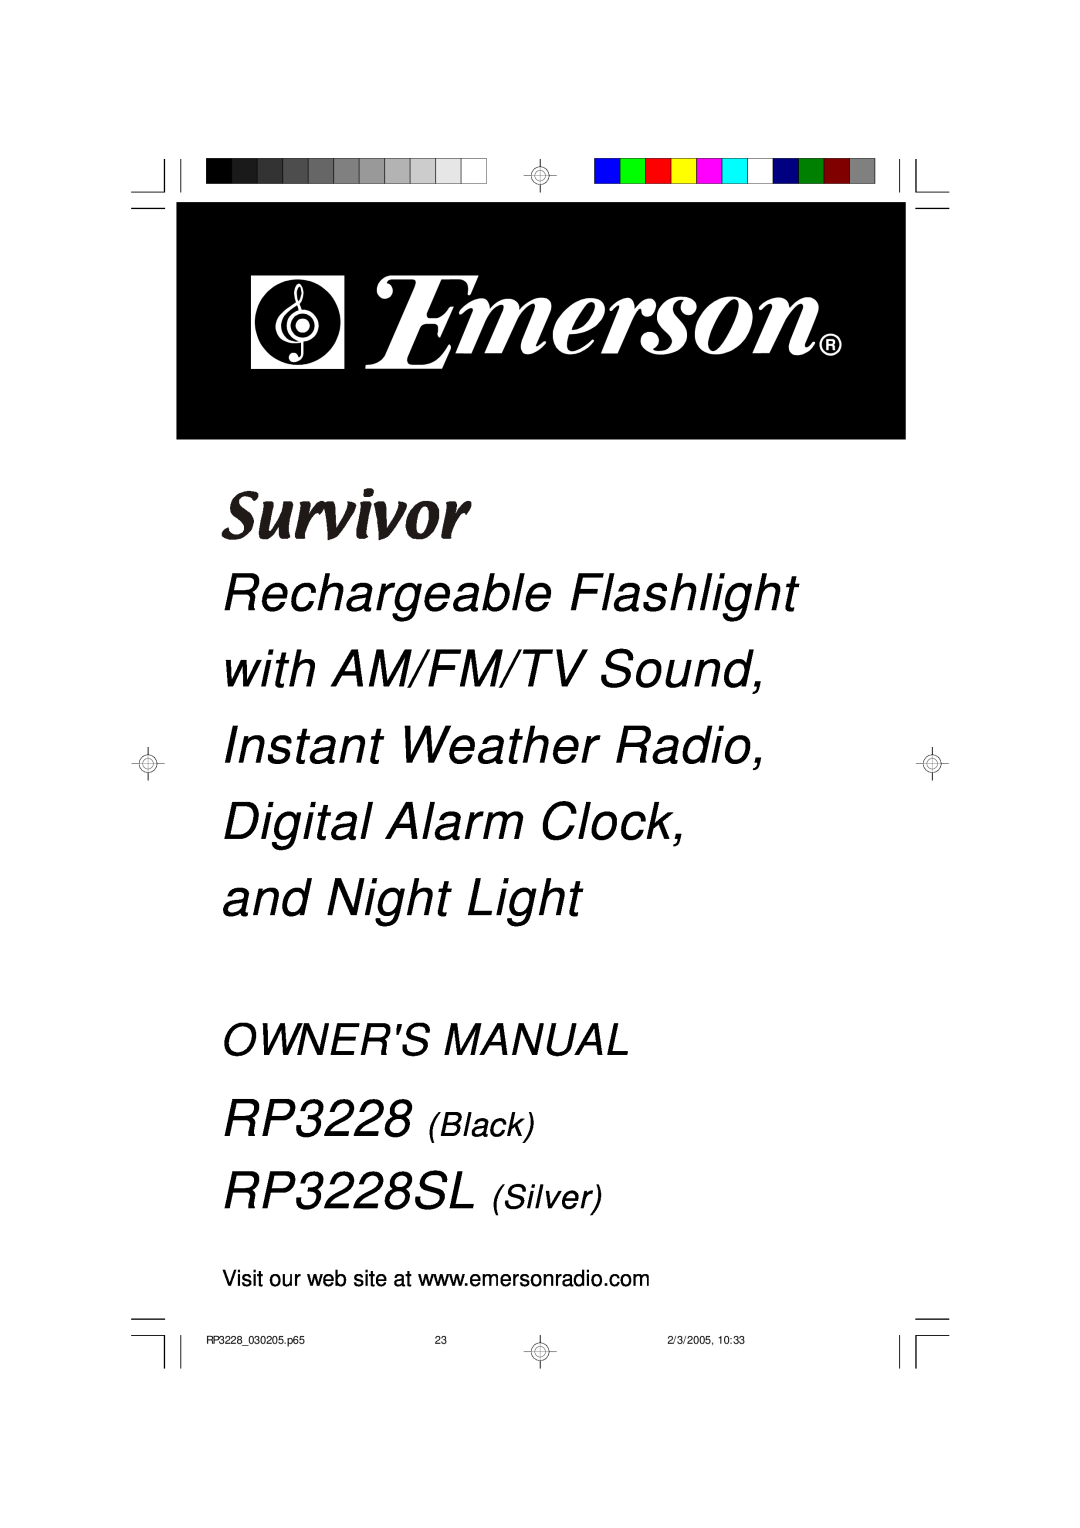 Emerson owner manual RP3228 Black RP3228SL Silver, RP3228 030205.p65, 2/3/2005 